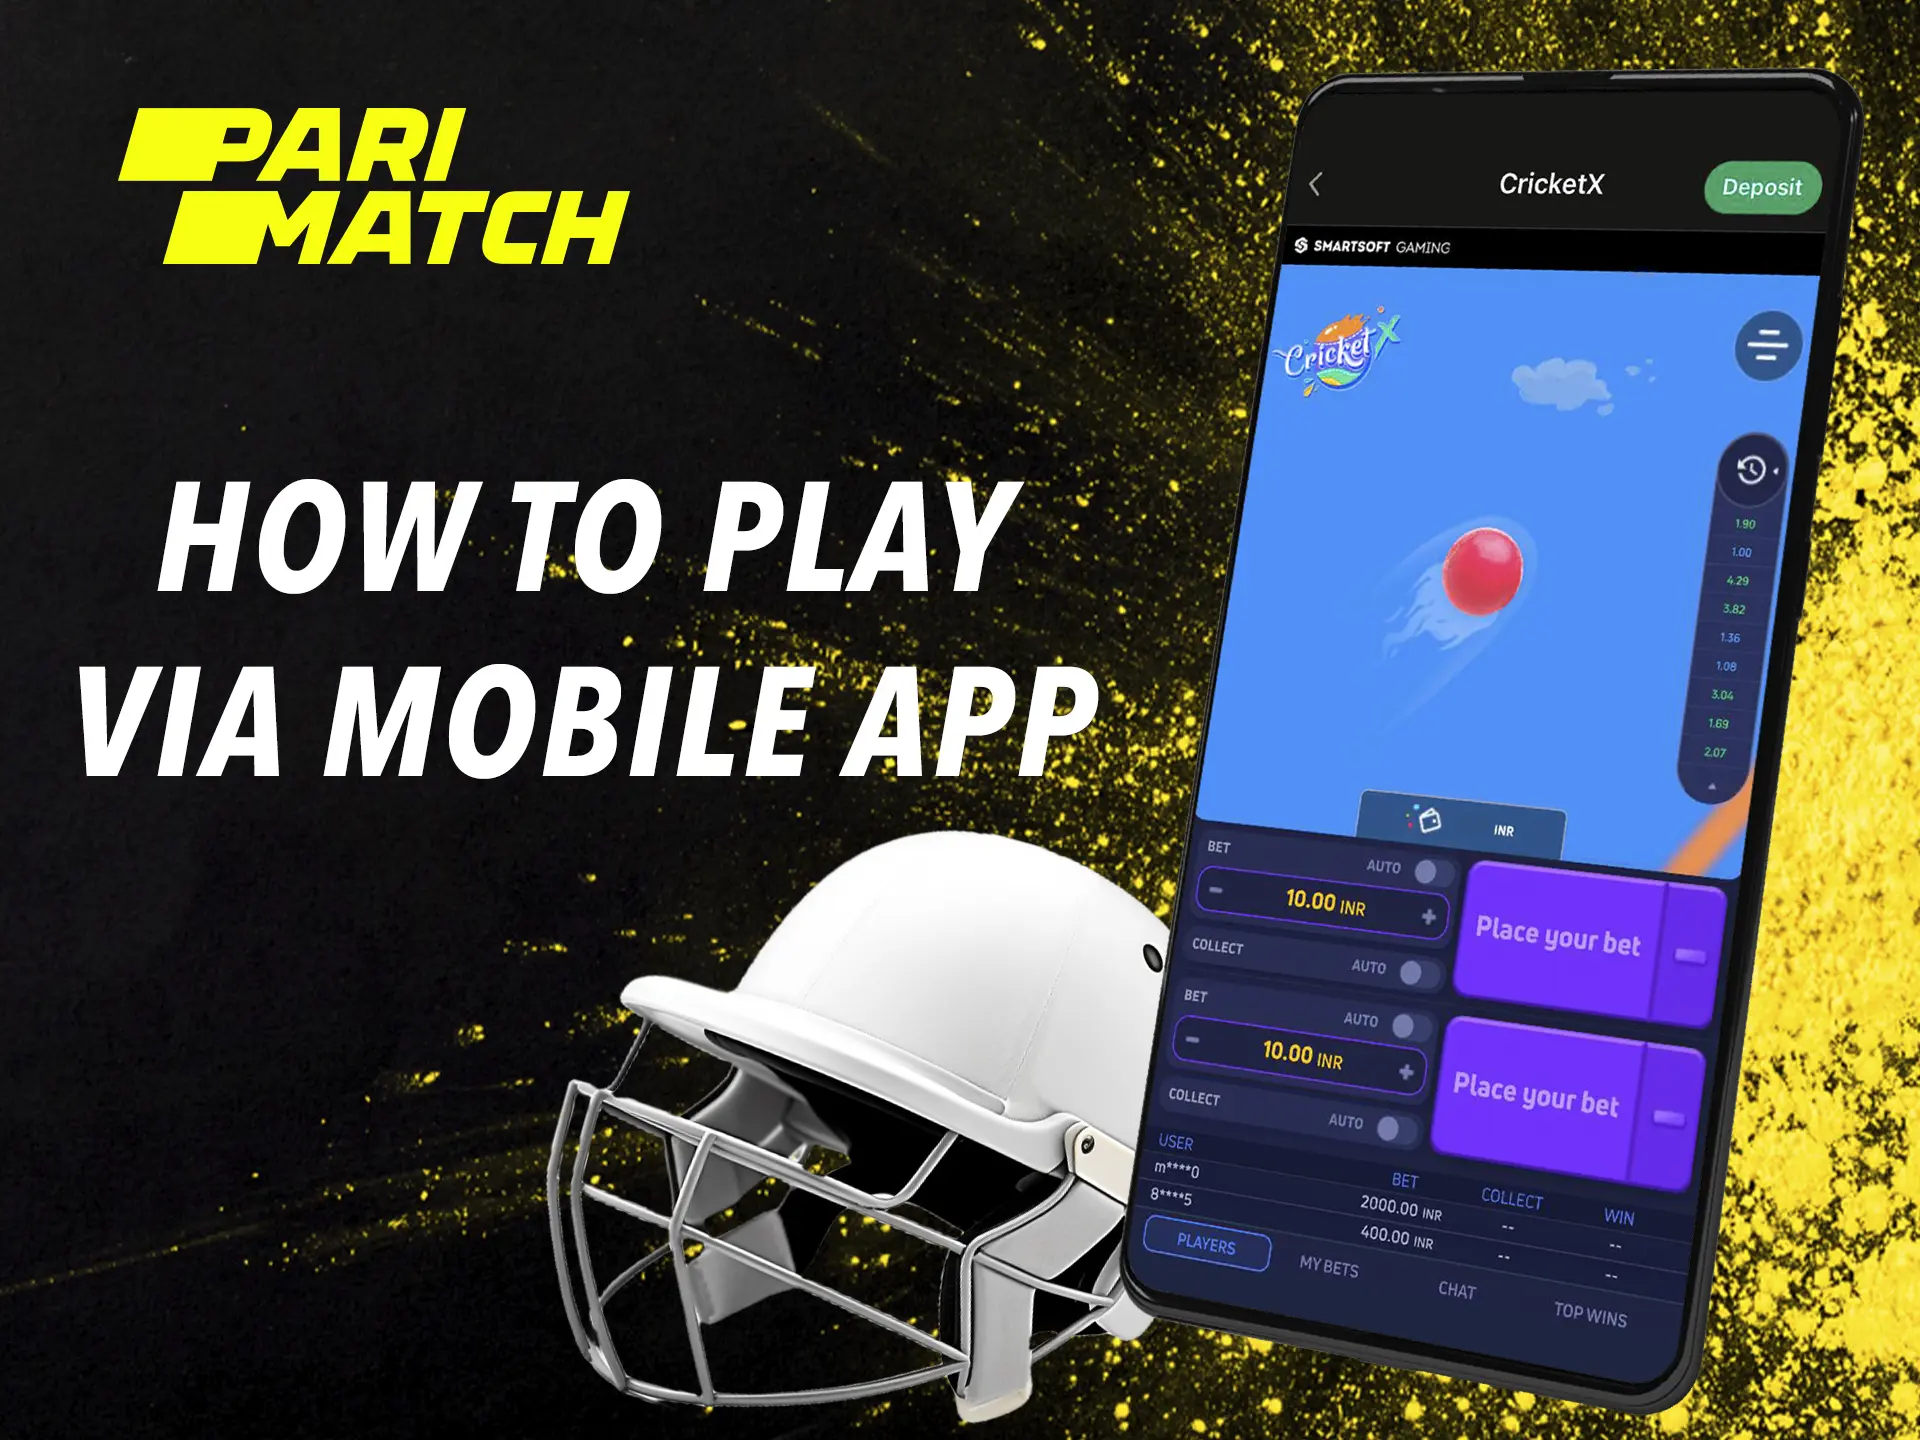 Parimatch's Cricket X game delivers perfect performance and smoothness on any mobile device.